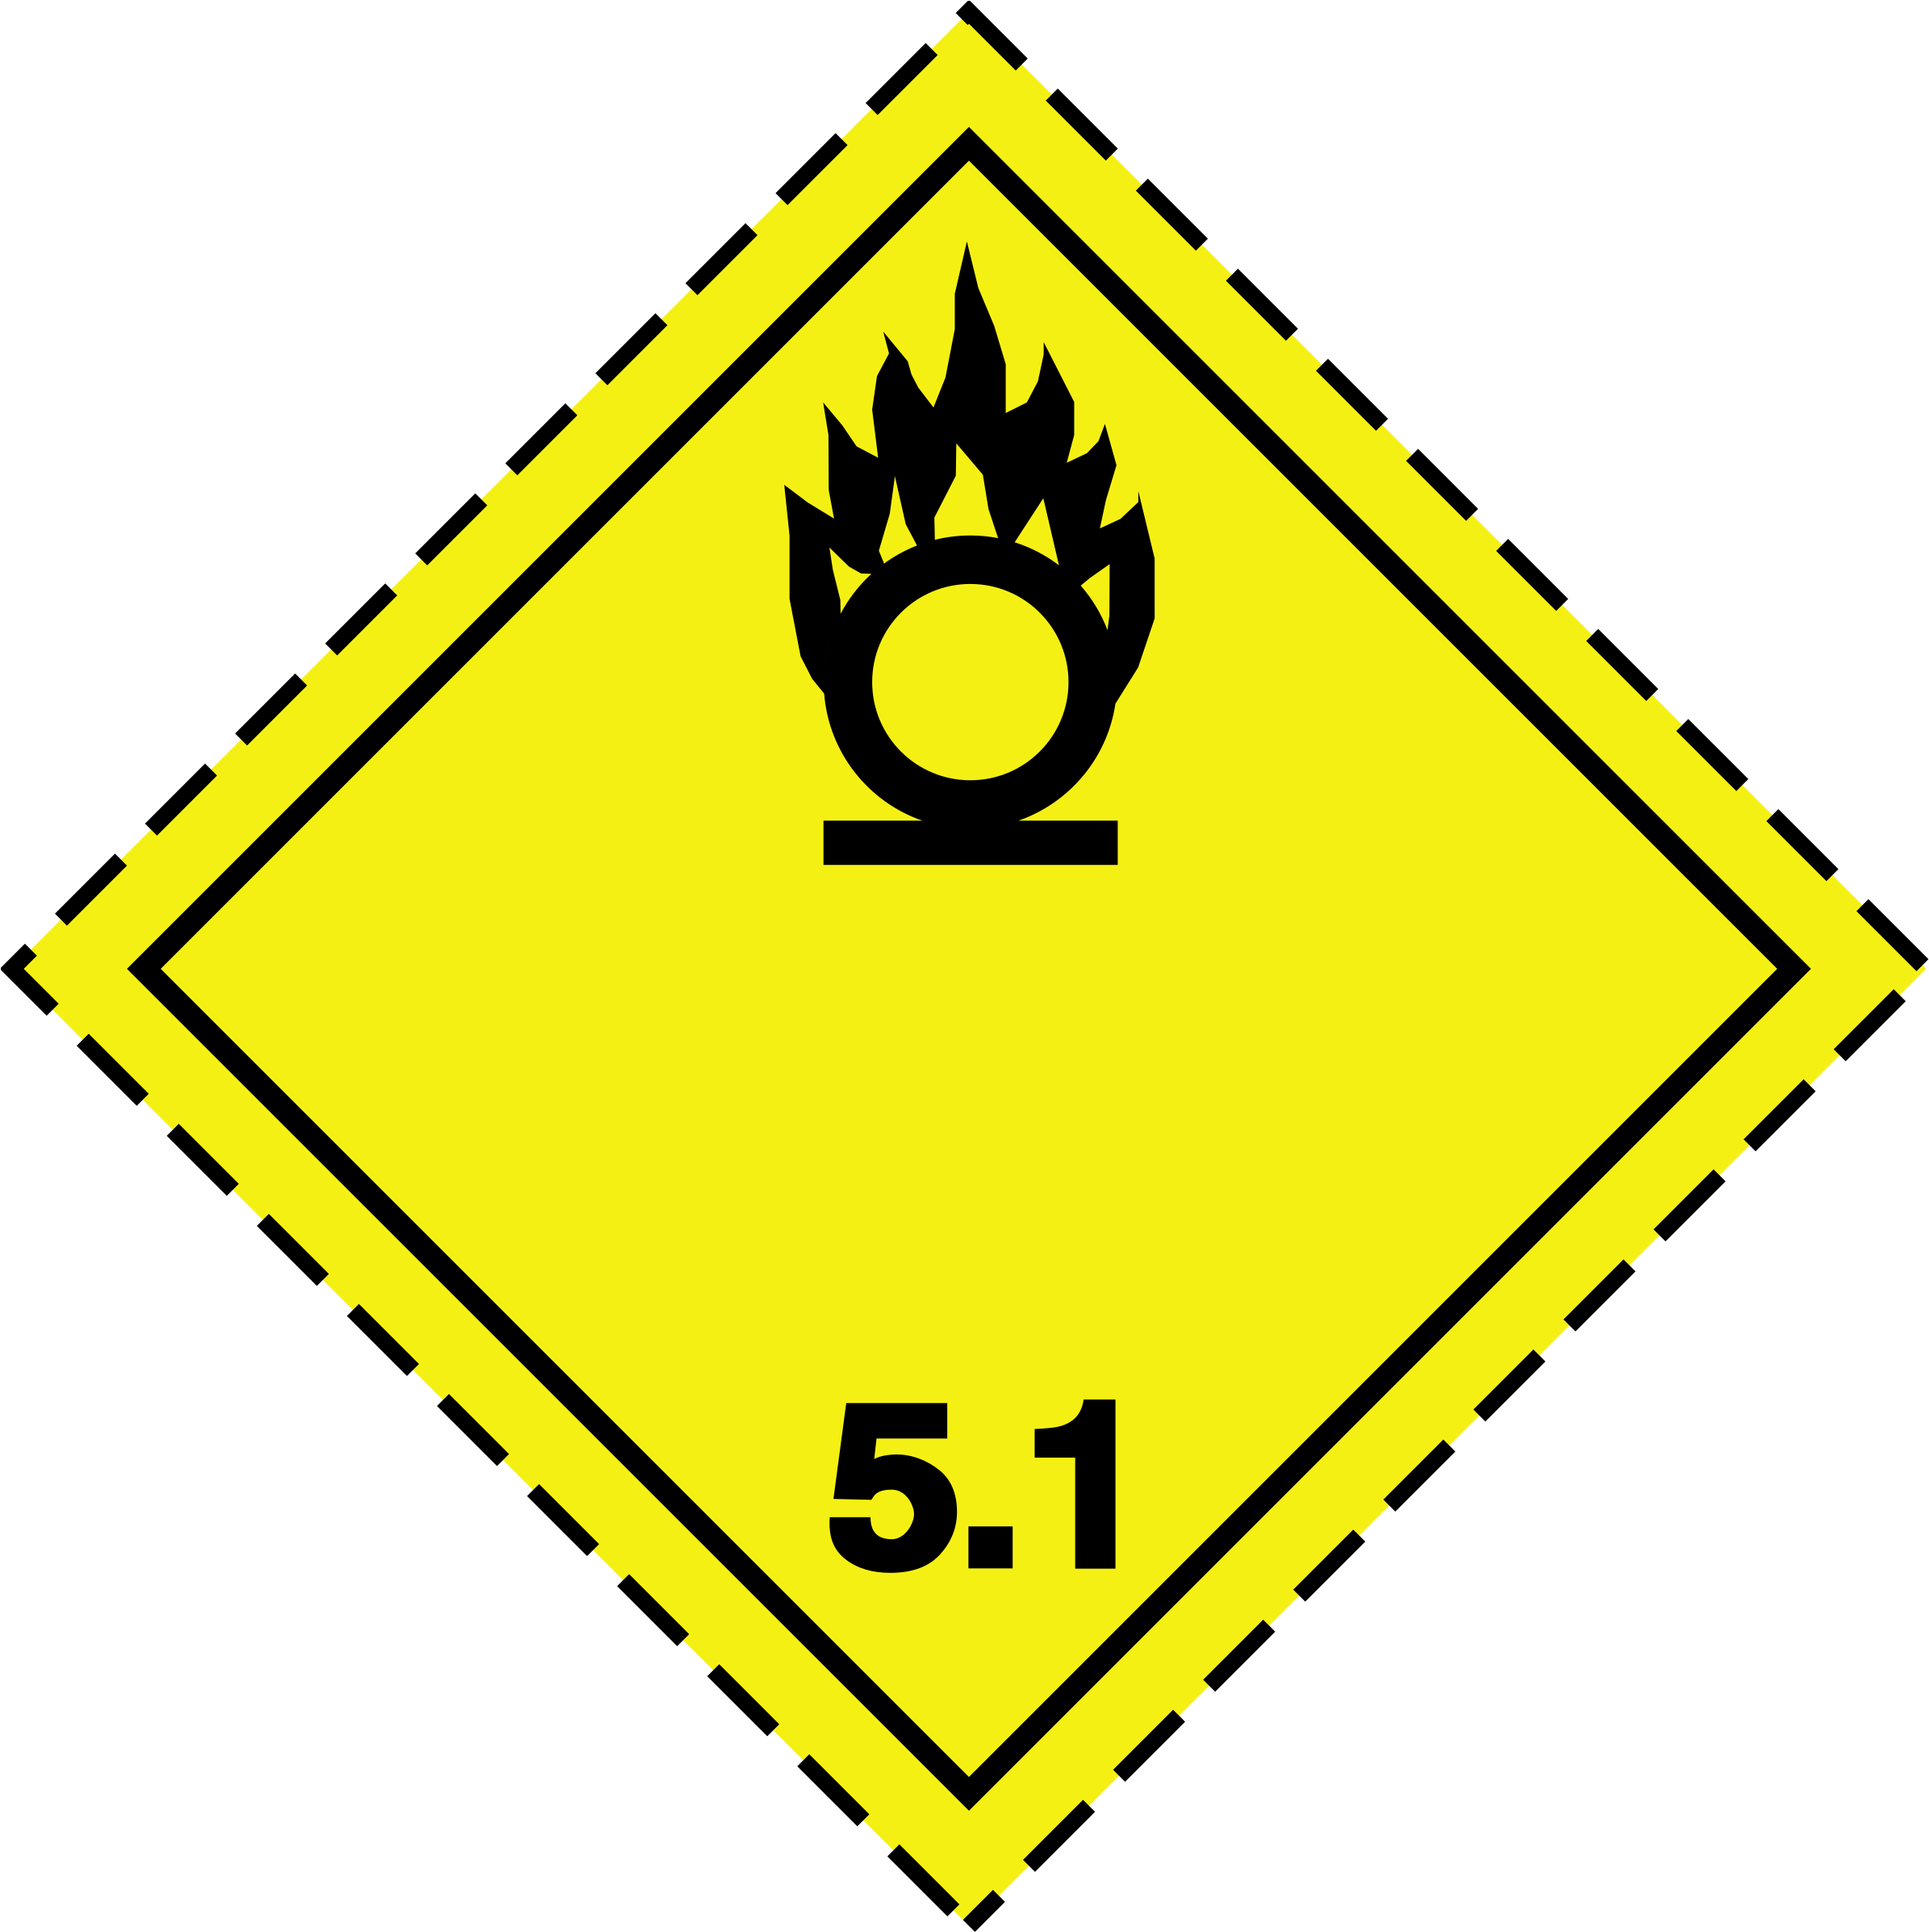 Explosive Symbol - Slippery When Wet Road Sign (2400x2400)